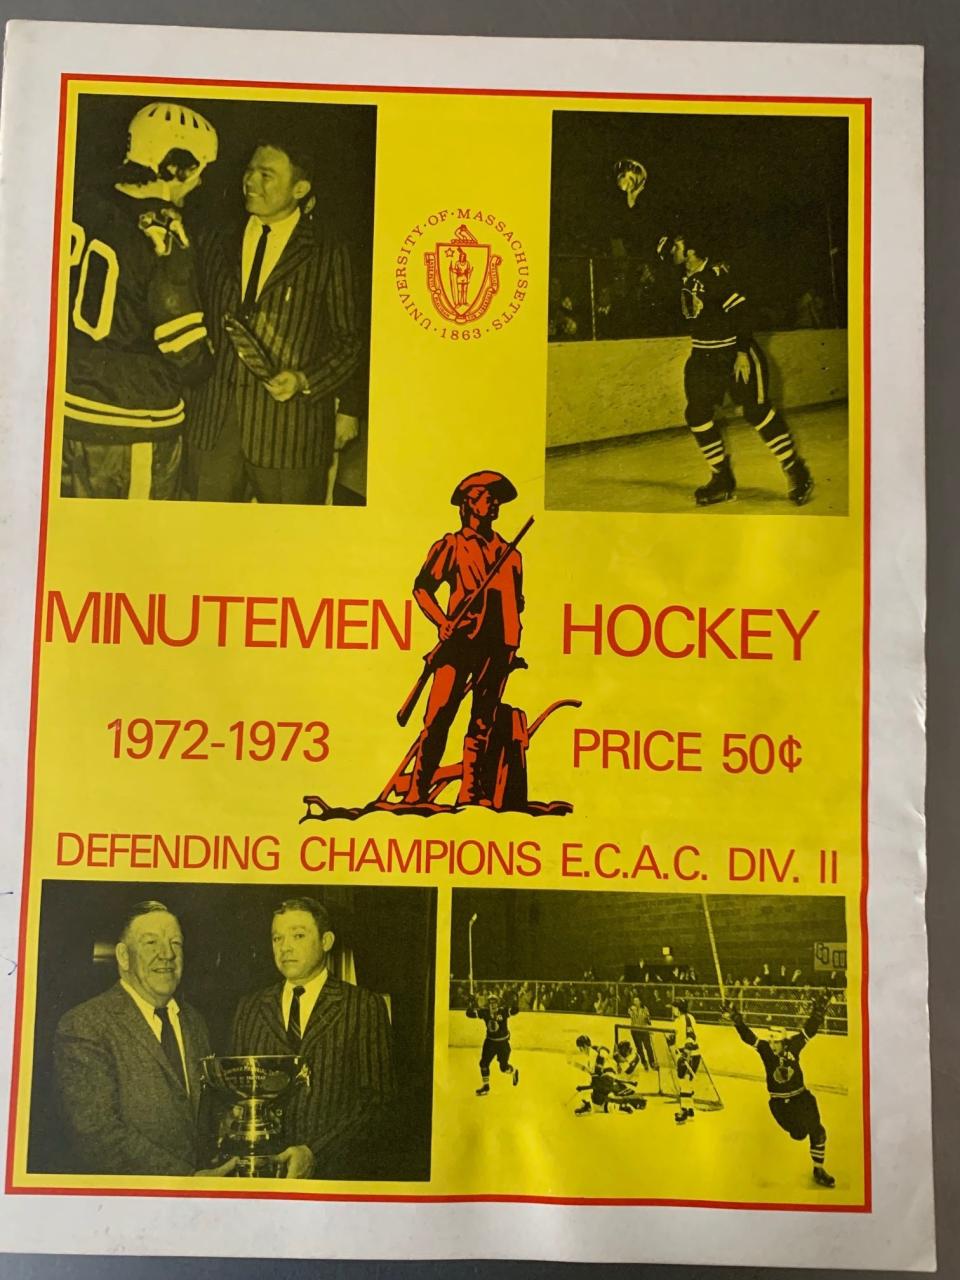 Not long after the Student Government Association vote at UMass in September 1972, the new nickname of Minutemen adorned the cover of the 1972-73 hockey game program.